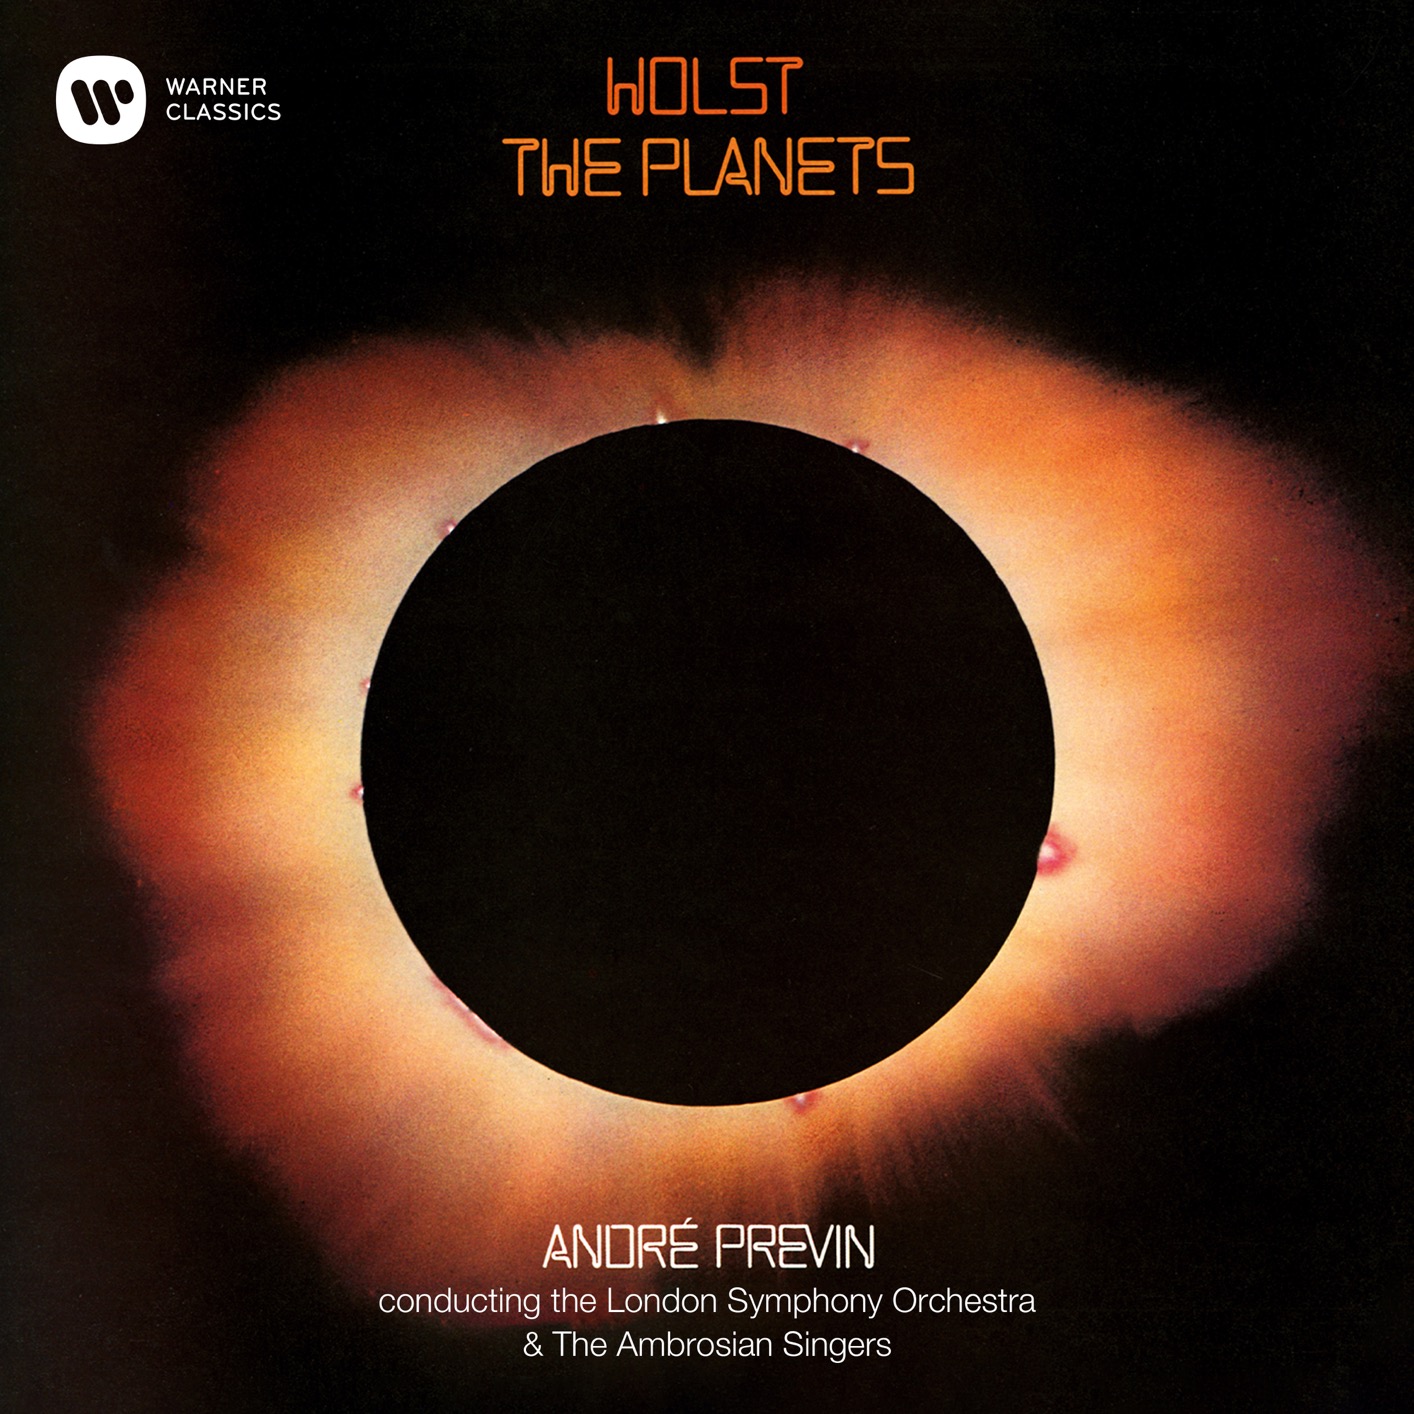 Andre Previn – Holst: The Planets, Op. 32 (1974/2019) [FLAC 24bit/96kHz]